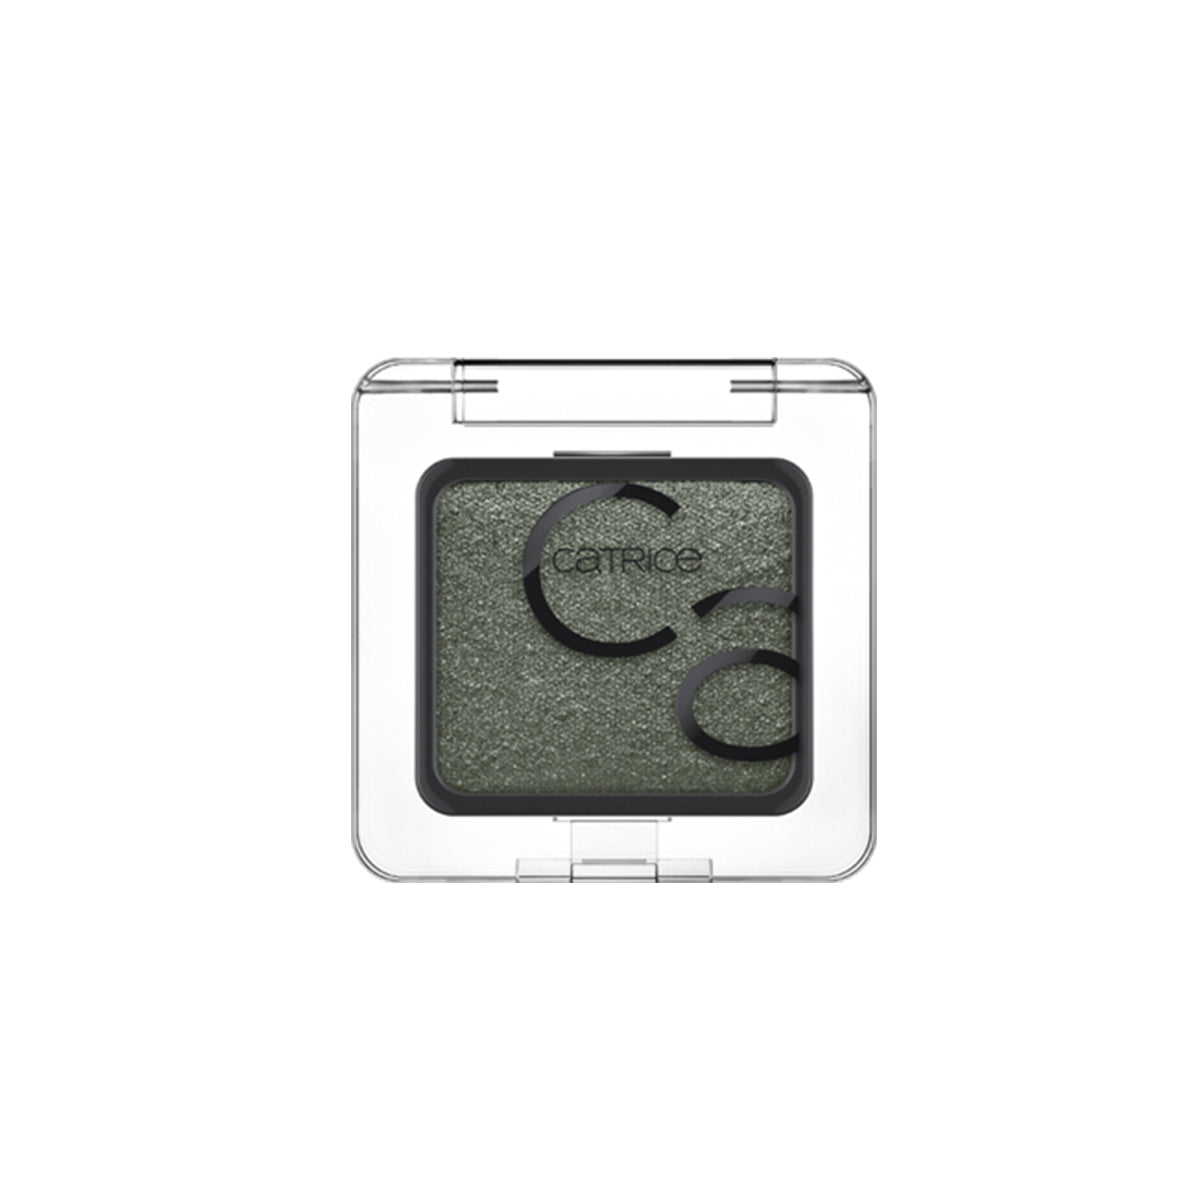 ART COULEURS EYESHADOWS 250 MYSTIC FOREST - CATRICE